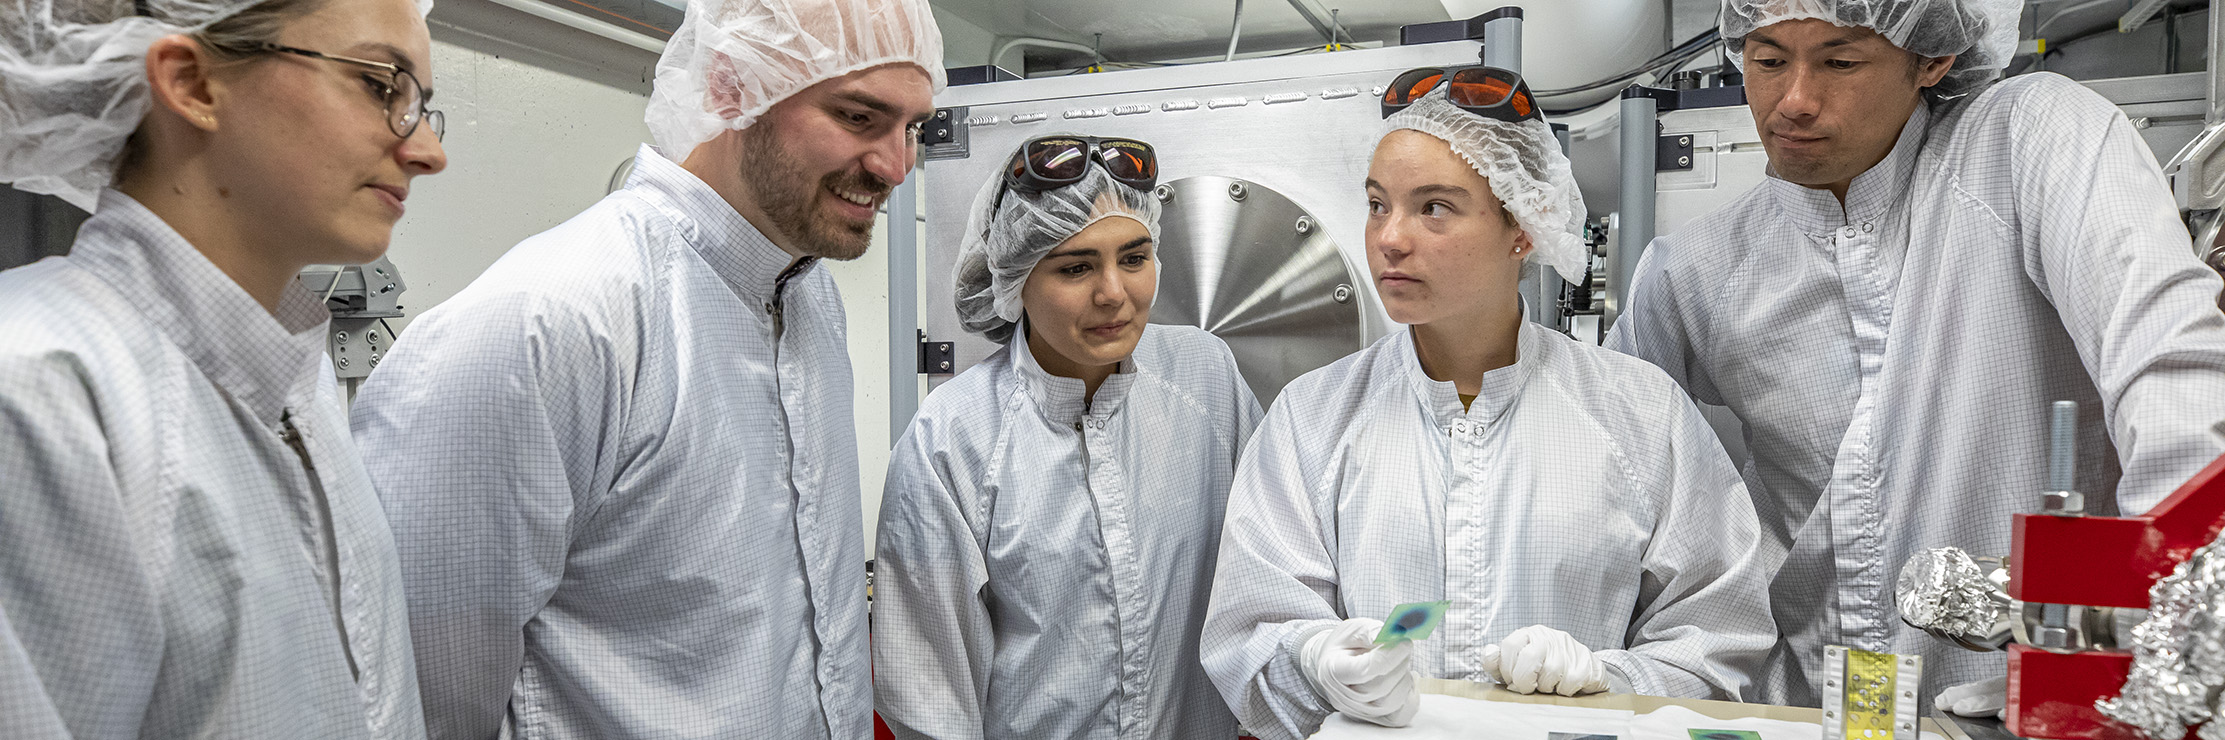 Several researchers in cleanroom attire discuss beam images in a laser lab